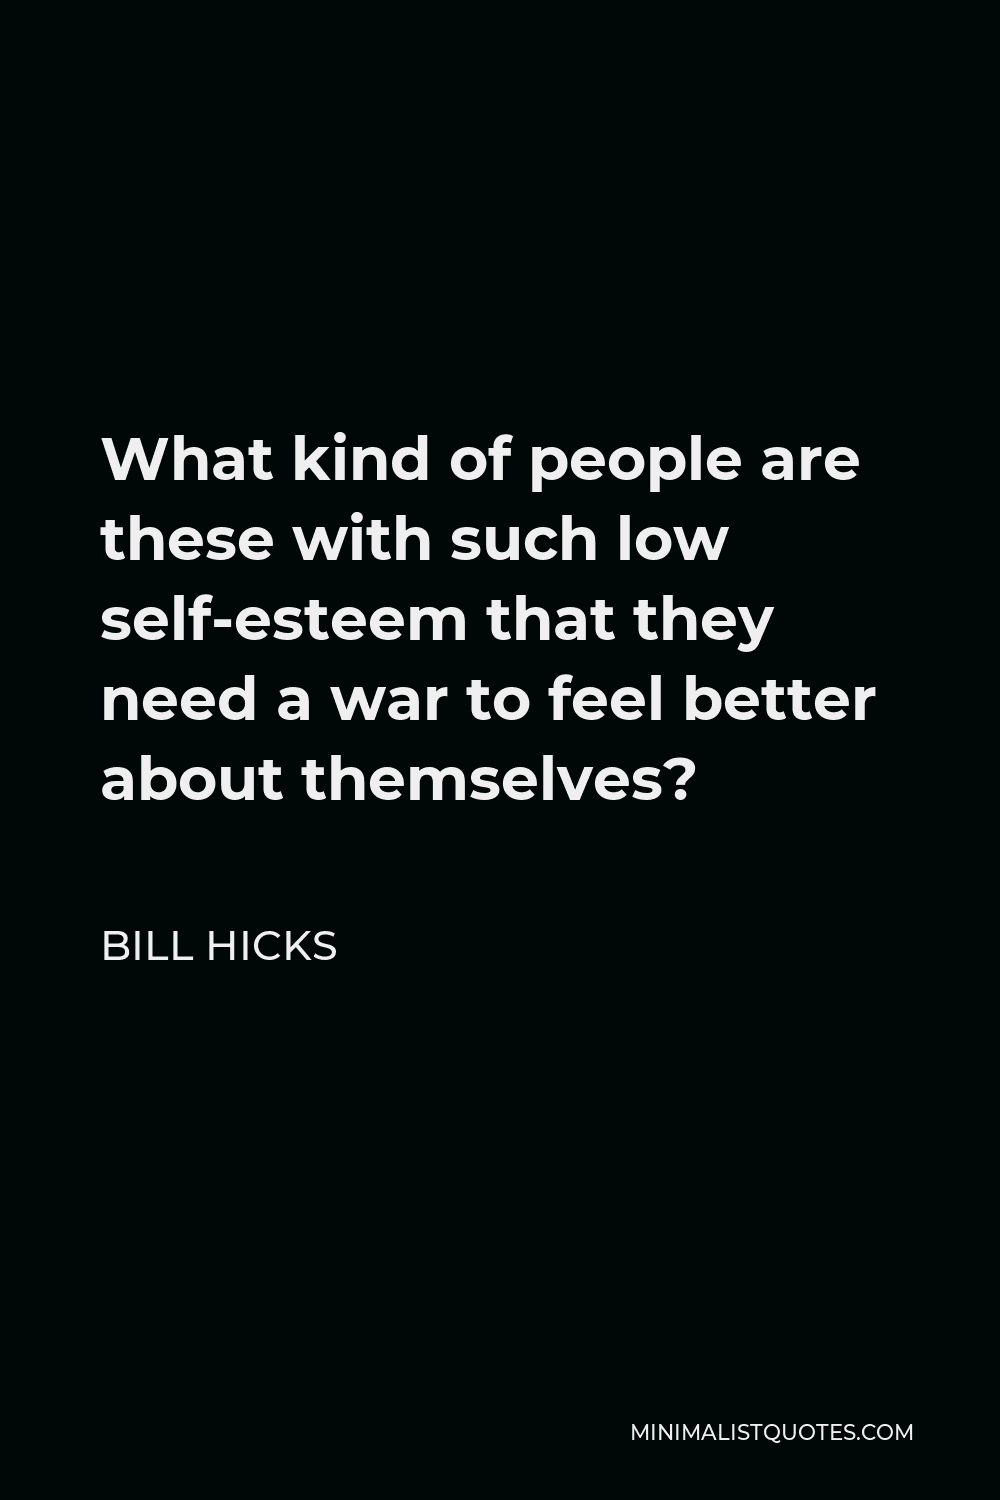 Bill Hicks Quote - What kind of people are these with such low self-esteem that they need a war to feel better about themselves?